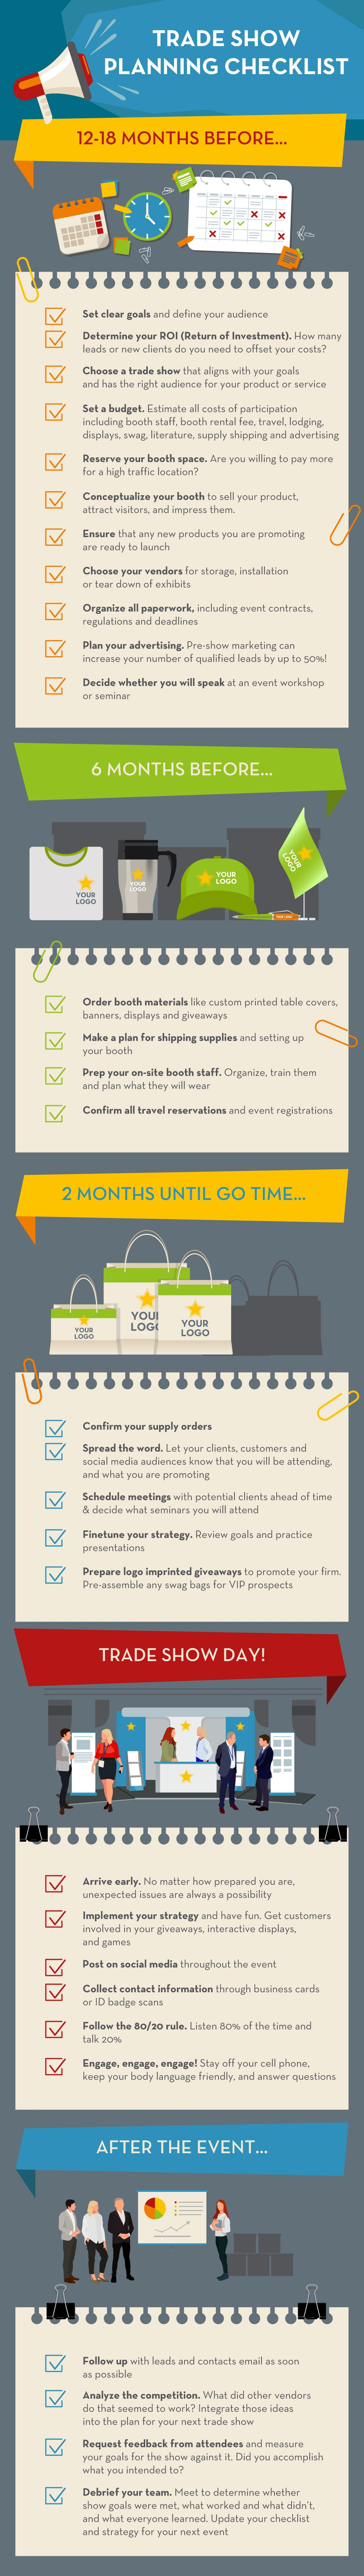 Trade Show Planning Infographic